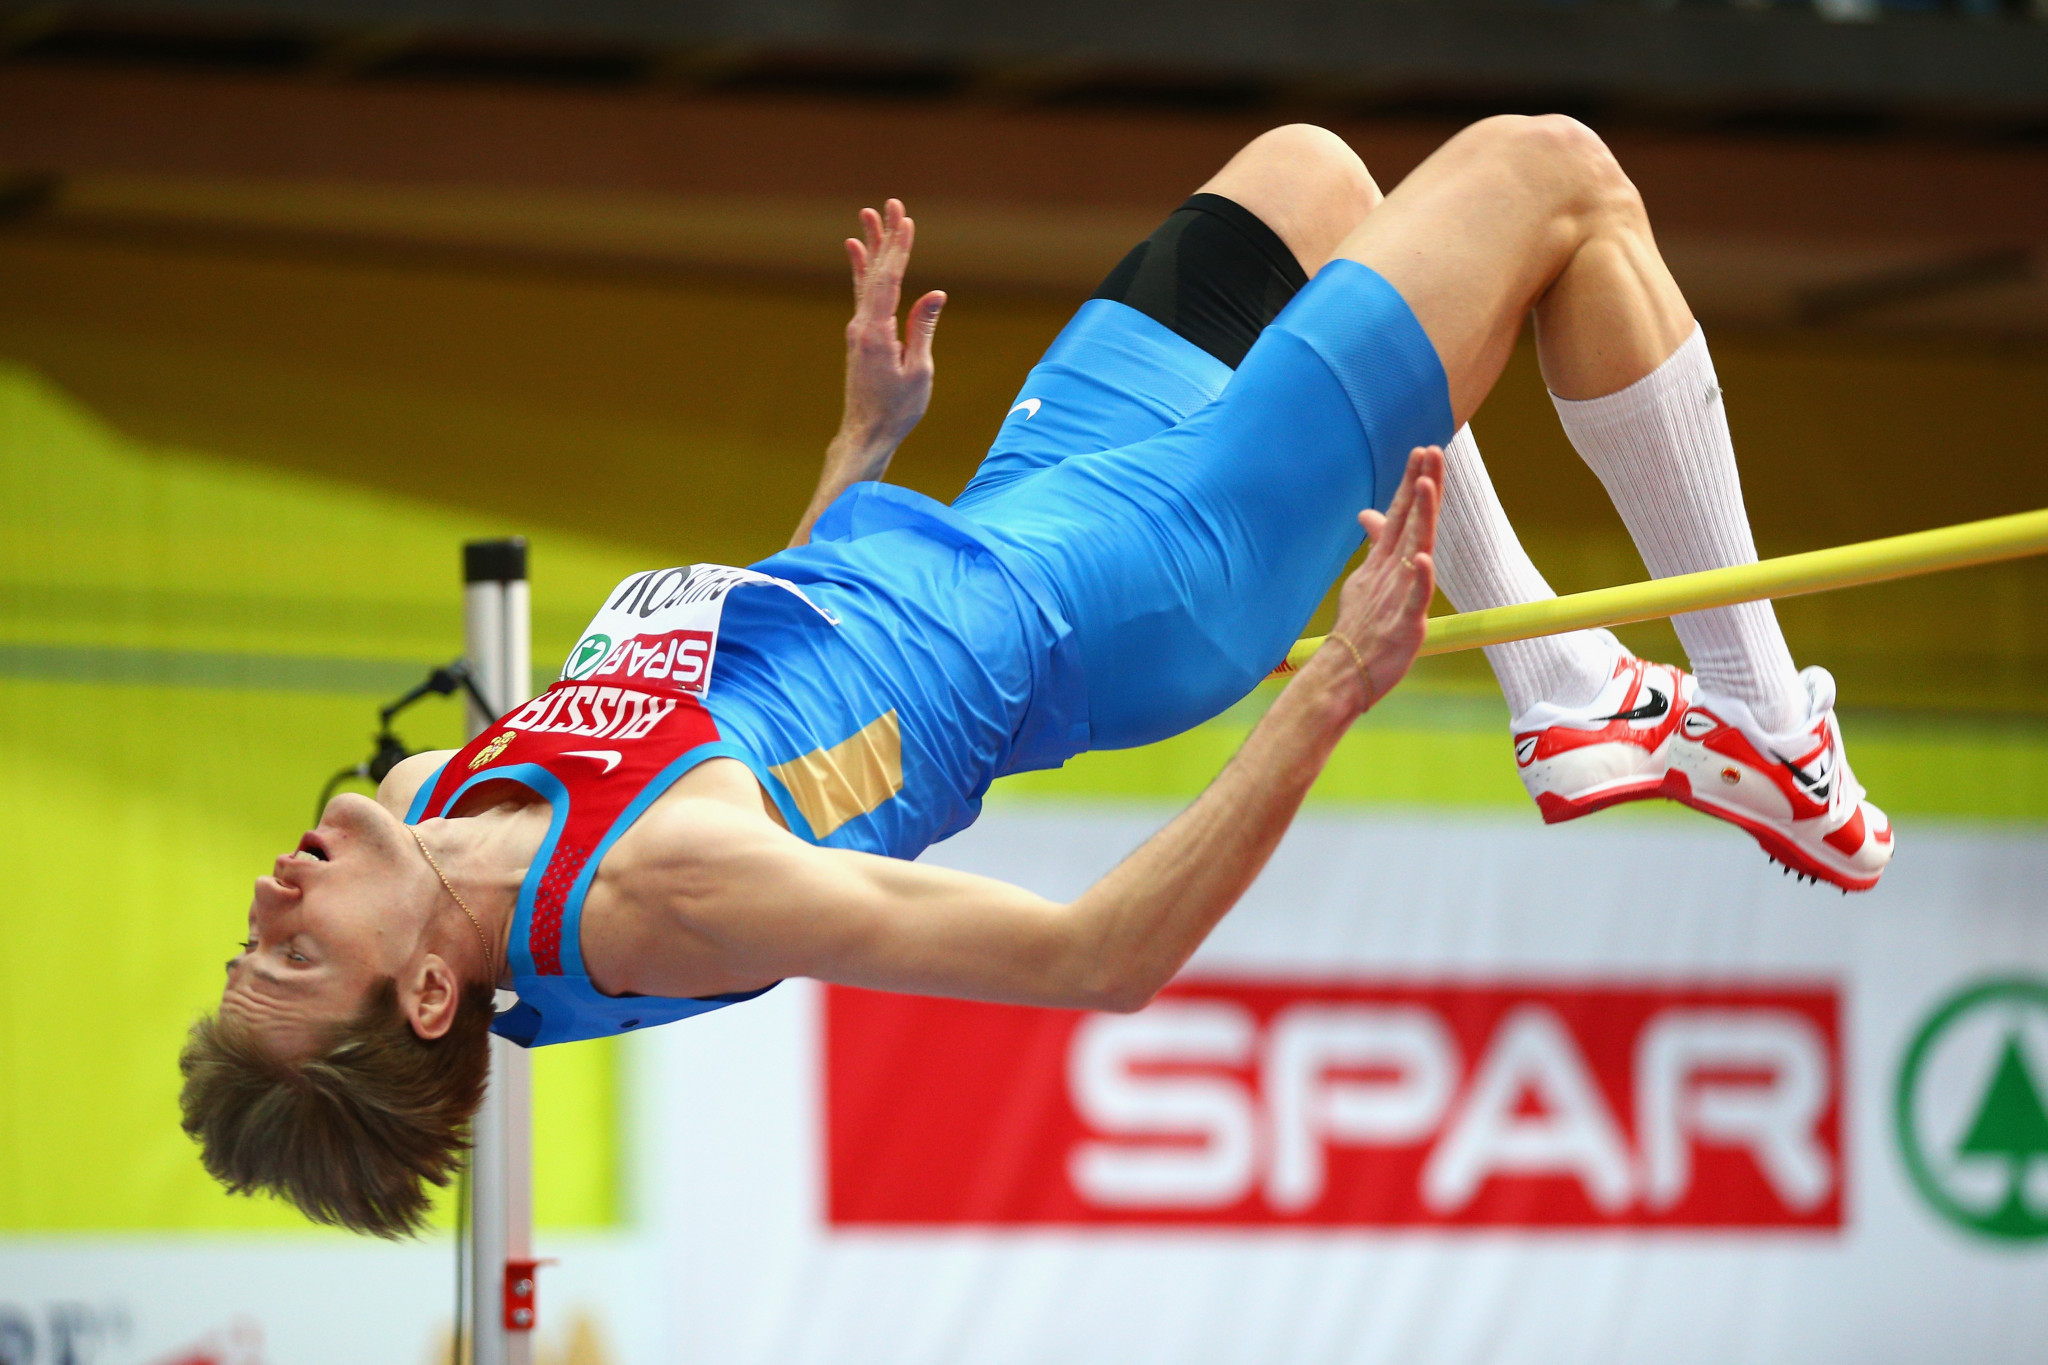 Russian high jumper Shustov given four-year ban over doping offence